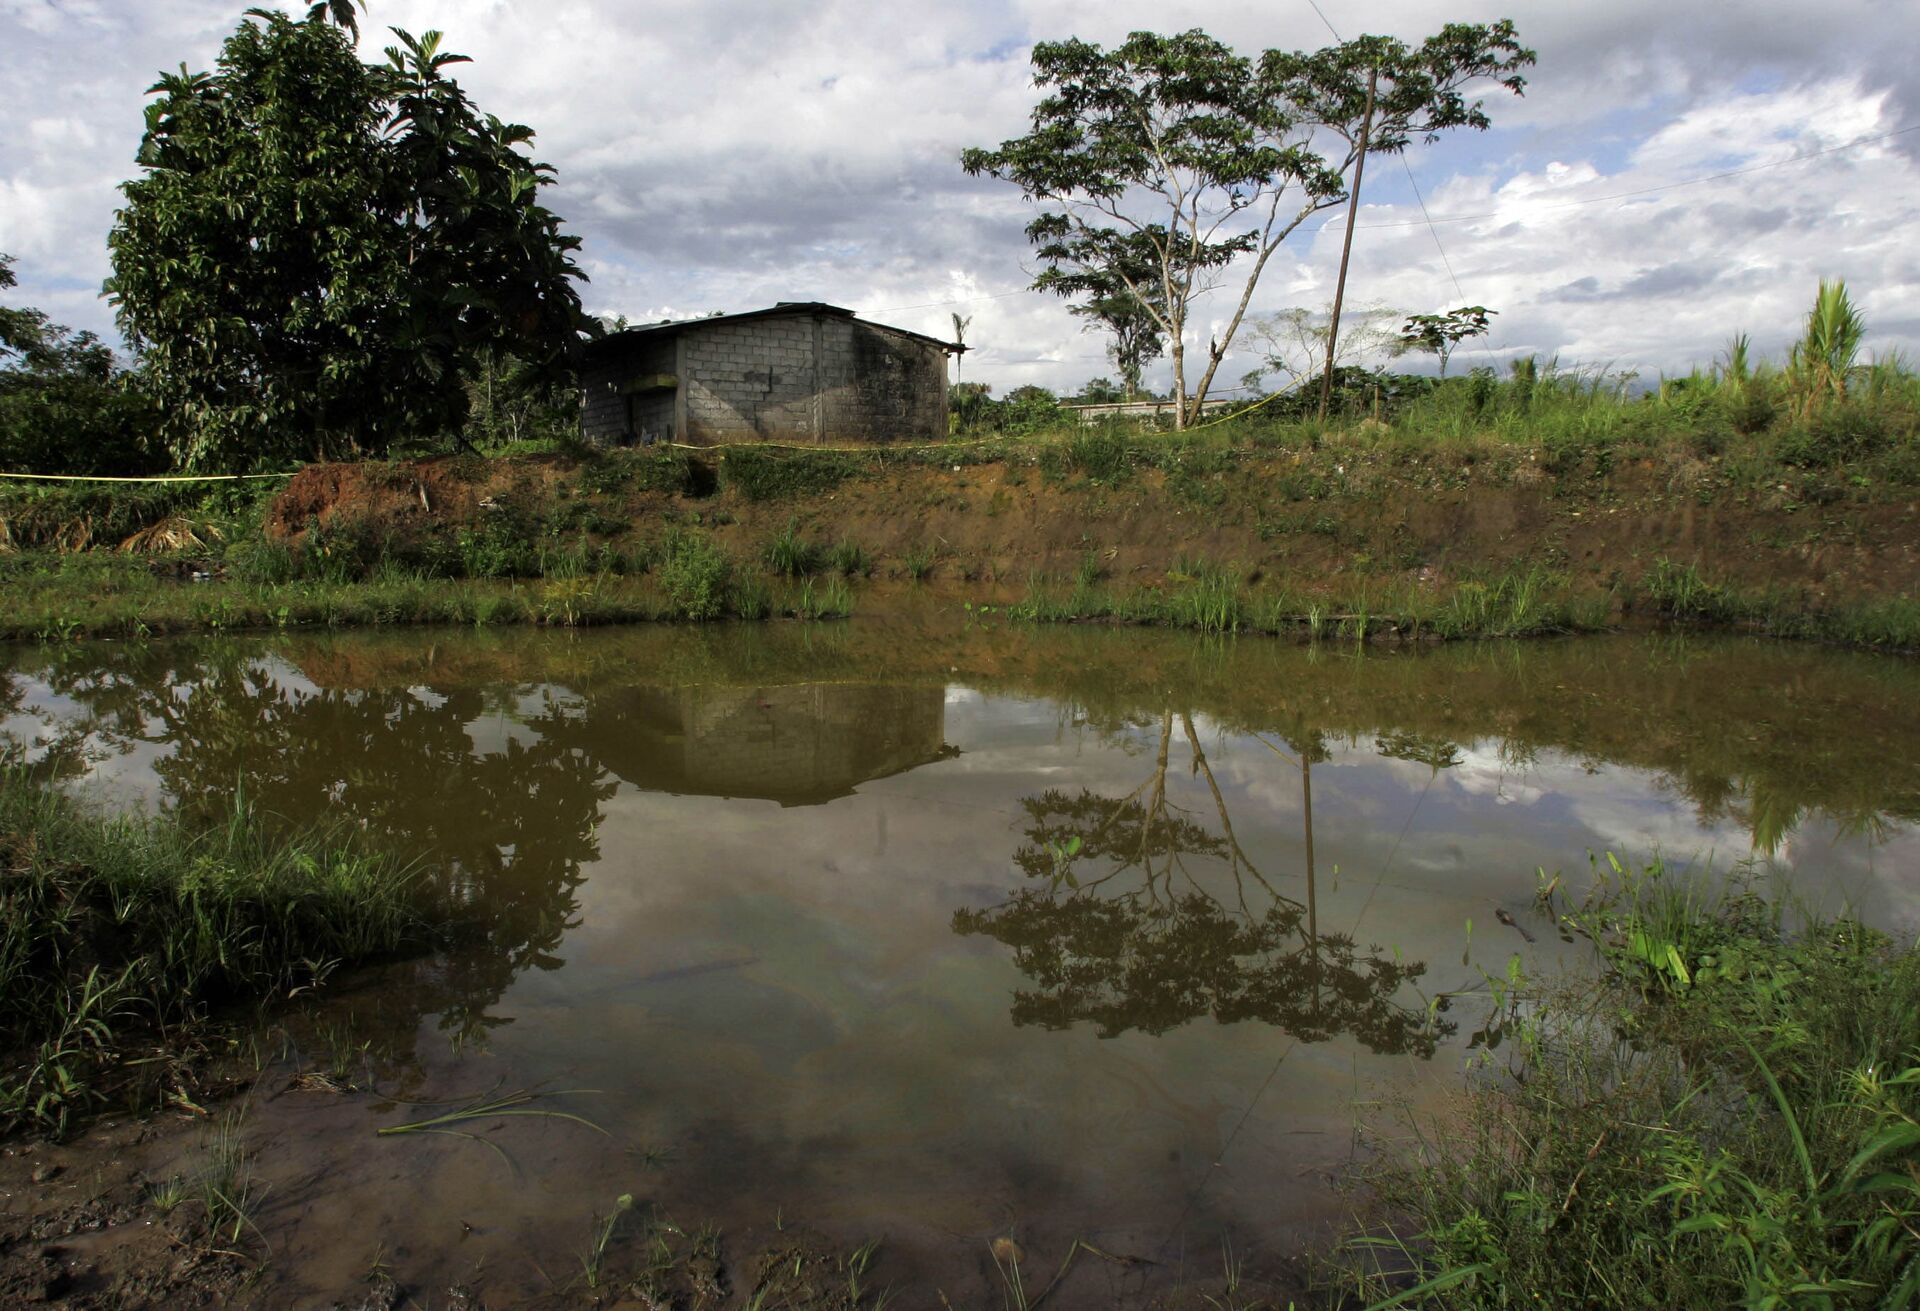 Oil floats in the water near a home in Lago Agrio, Ecuador on Aug. 4, 2008. Ecuador's President Rafael Correa has sided squarely with the 30,000 plaintiffs, Indians and colonists, in a class-action suit, dubbed an Amazon Chernobyl by environmentalists, over the slow poisoning of a Rhode Island-sized expanse of rainforest with millions of gallons of oil and billions more of toxic wastewater. - Sputnik International, 1920, 07.09.2021